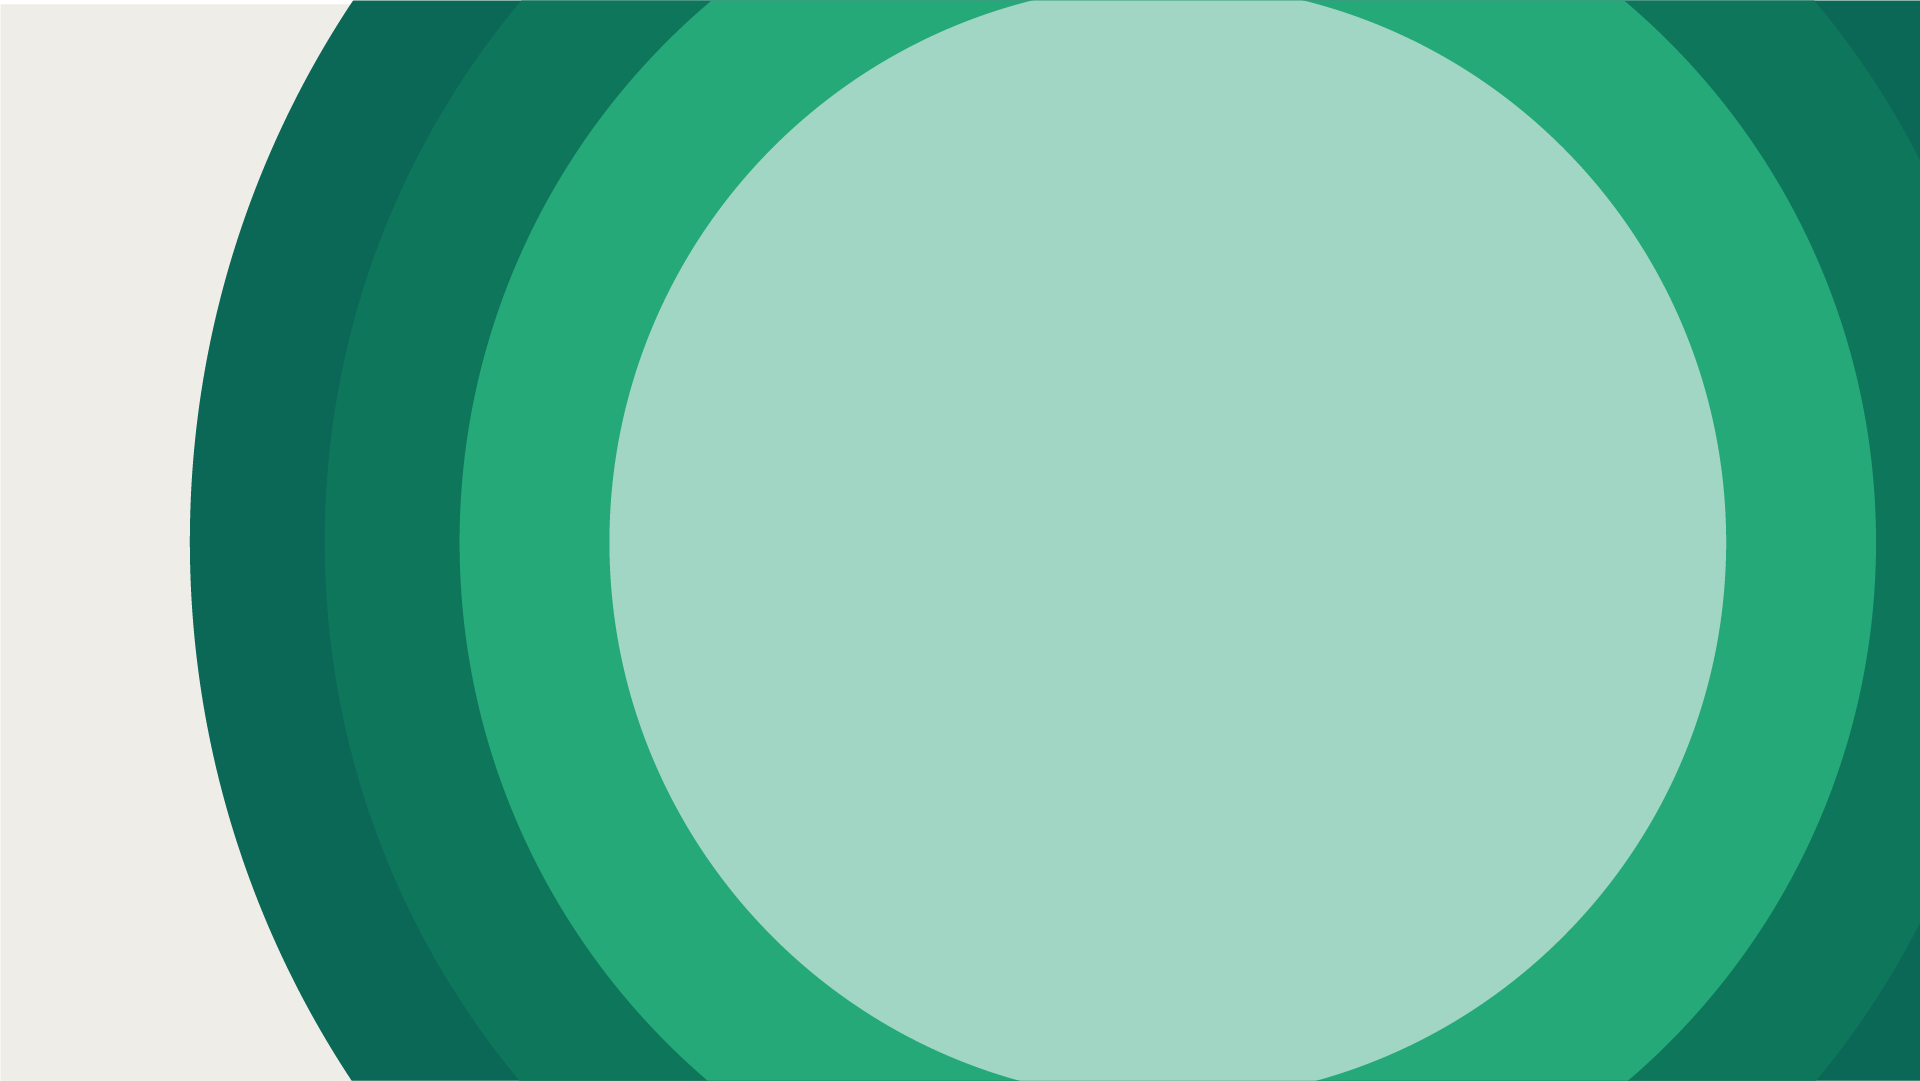 Decorative Graphic with concentric green circles